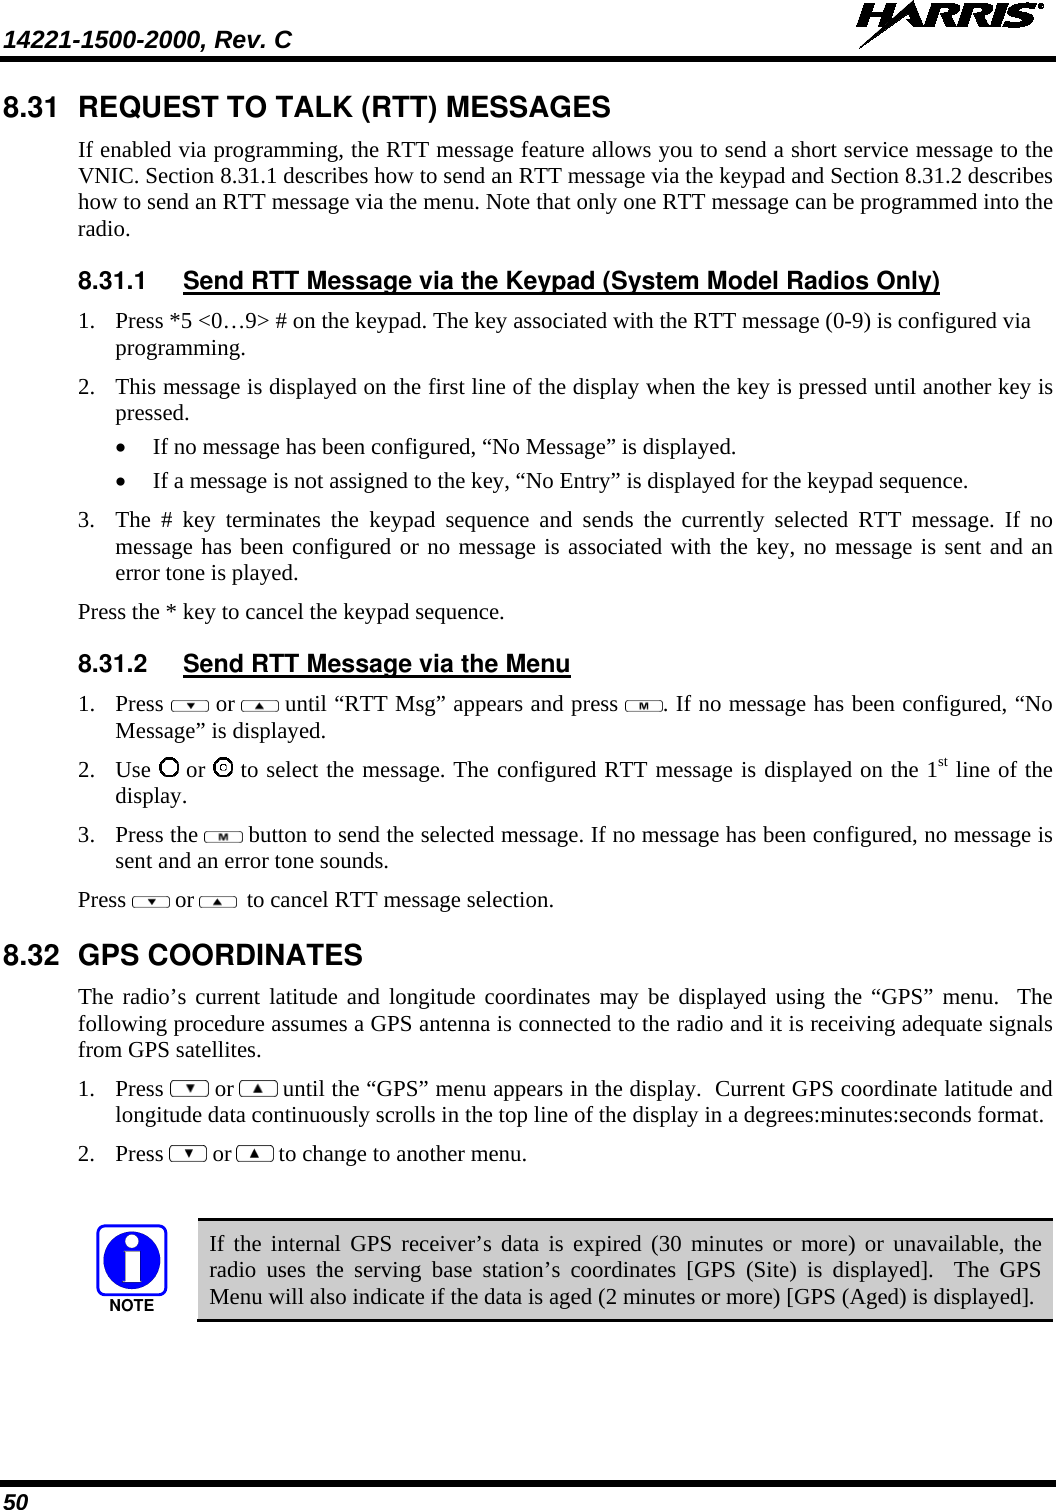 14221-1500-2000, Rev. C   50 8.31 REQUEST TO TALK (RTT) MESSAGES If enabled via programming, the RTT message feature allows you to send a short service message to the VNIC. Section 8.31.1 describes how to send an RTT message via the keypad and Section 8.31.2 describes how to send an RTT message via the menu. Note that only one RTT message can be programmed into the radio. 8.31.1 Send RTT Message via the Keypad (System Model Radios Only) 1. Press *5 &lt;0…9&gt; # on the keypad. The key associated with the RTT message (0-9) is configured via programming. 2. This message is displayed on the first line of the display when the key is pressed until another key is pressed.  • If no message has been configured, “No Message” is displayed. • If a message is not assigned to the key, “No Entry” is displayed for the keypad sequence. 3. The # key terminates the keypad sequence and sends the currently selected RTT message. If no message has been configured or no message is associated with the key, no message is sent and an error tone is played. Press the * key to cancel the keypad sequence. 8.31.2 Send RTT Message via the Menu 1. Press   or  until “RTT Msg” appears and press  . If no message has been configured, “No Message” is displayed. 2. Use  or   to select the message. The configured RTT message is displayed on the 1st line of the display. 3. Press the   button to send the selected message. If no message has been configured, no message is sent and an error tone sounds.  Press   or   to cancel RTT message selection. 8.32 GPS COORDINATES The radio’s current latitude and longitude coordinates may be displayed using the “GPS” menu.  The following procedure assumes a GPS antenna is connected to the radio and it is receiving adequate signals from GPS satellites. 1. Press   or  until the “GPS” menu appears in the display.  Current GPS coordinate latitude and longitude data continuously scrolls in the top line of the display in a degrees:minutes:seconds format. 2. Press   or  to change to another menu.  NOTE If the internal GPS receiver’s data is expired (30 minutes or more) or unavailable, the radio uses the serving base station’s coordinates [GPS (Site) is displayed].  The GPS Menu will also indicate if the data is aged (2 minutes or more) [GPS (Aged) is displayed]. 